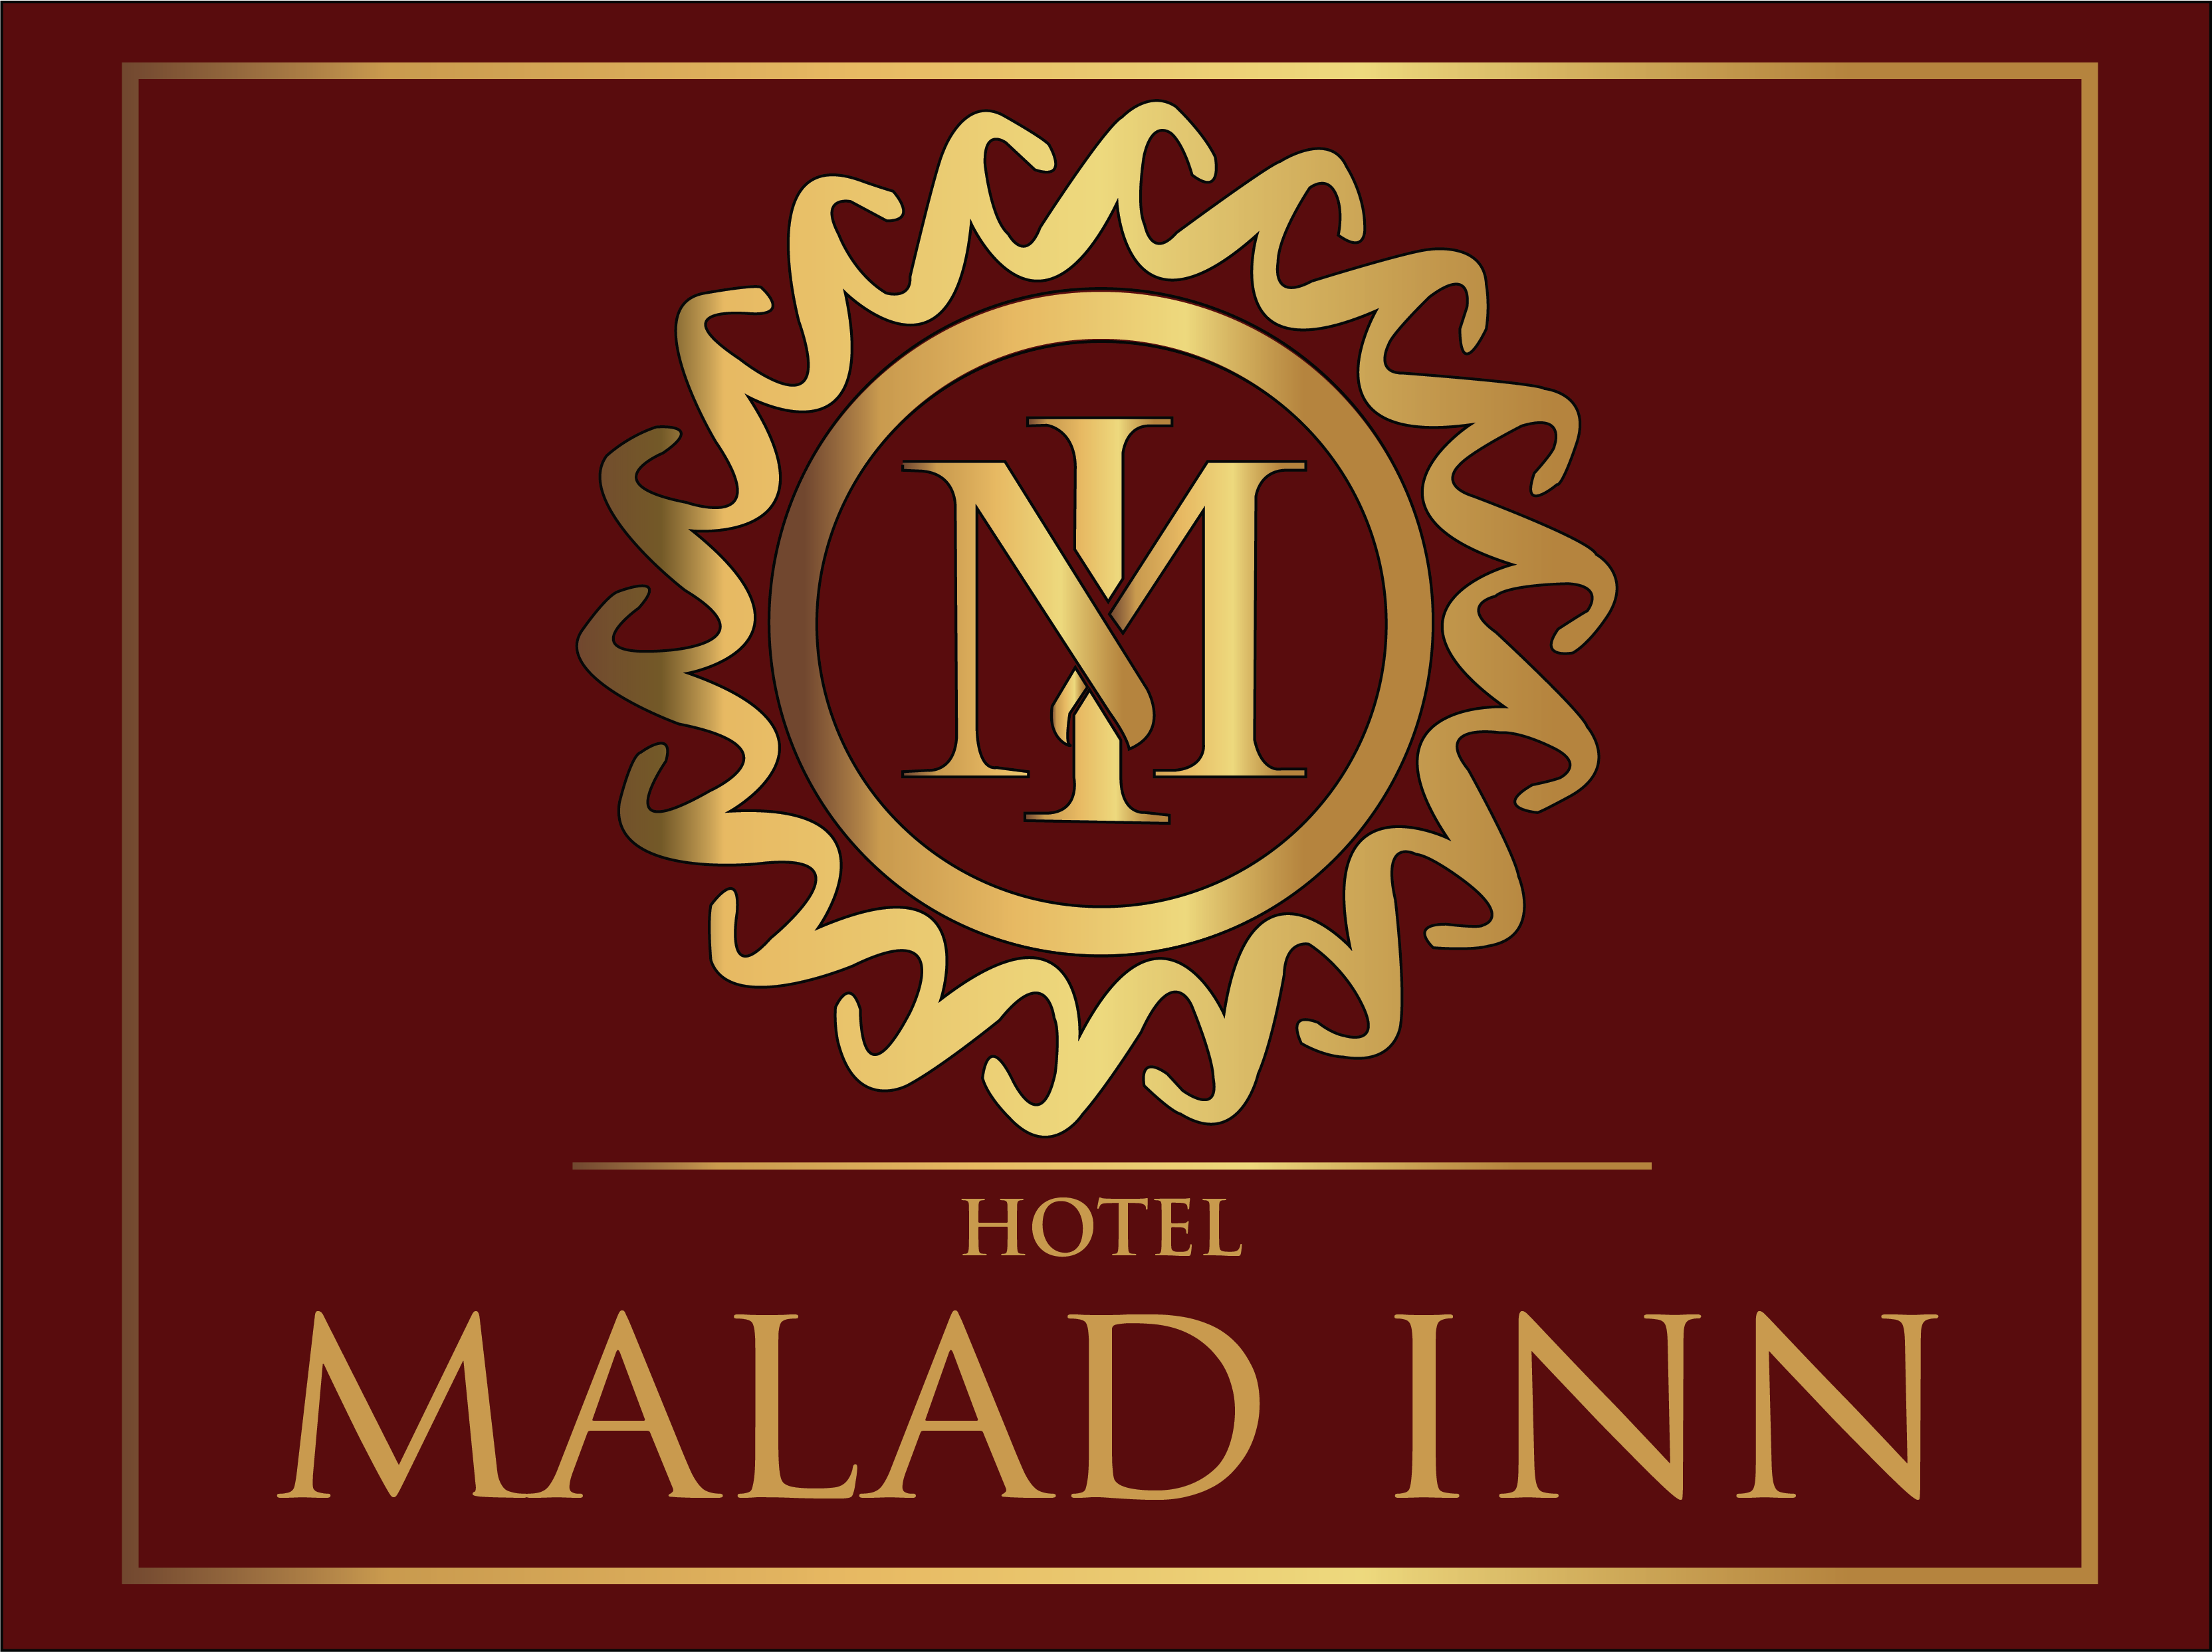 Best rooms to stay in malad